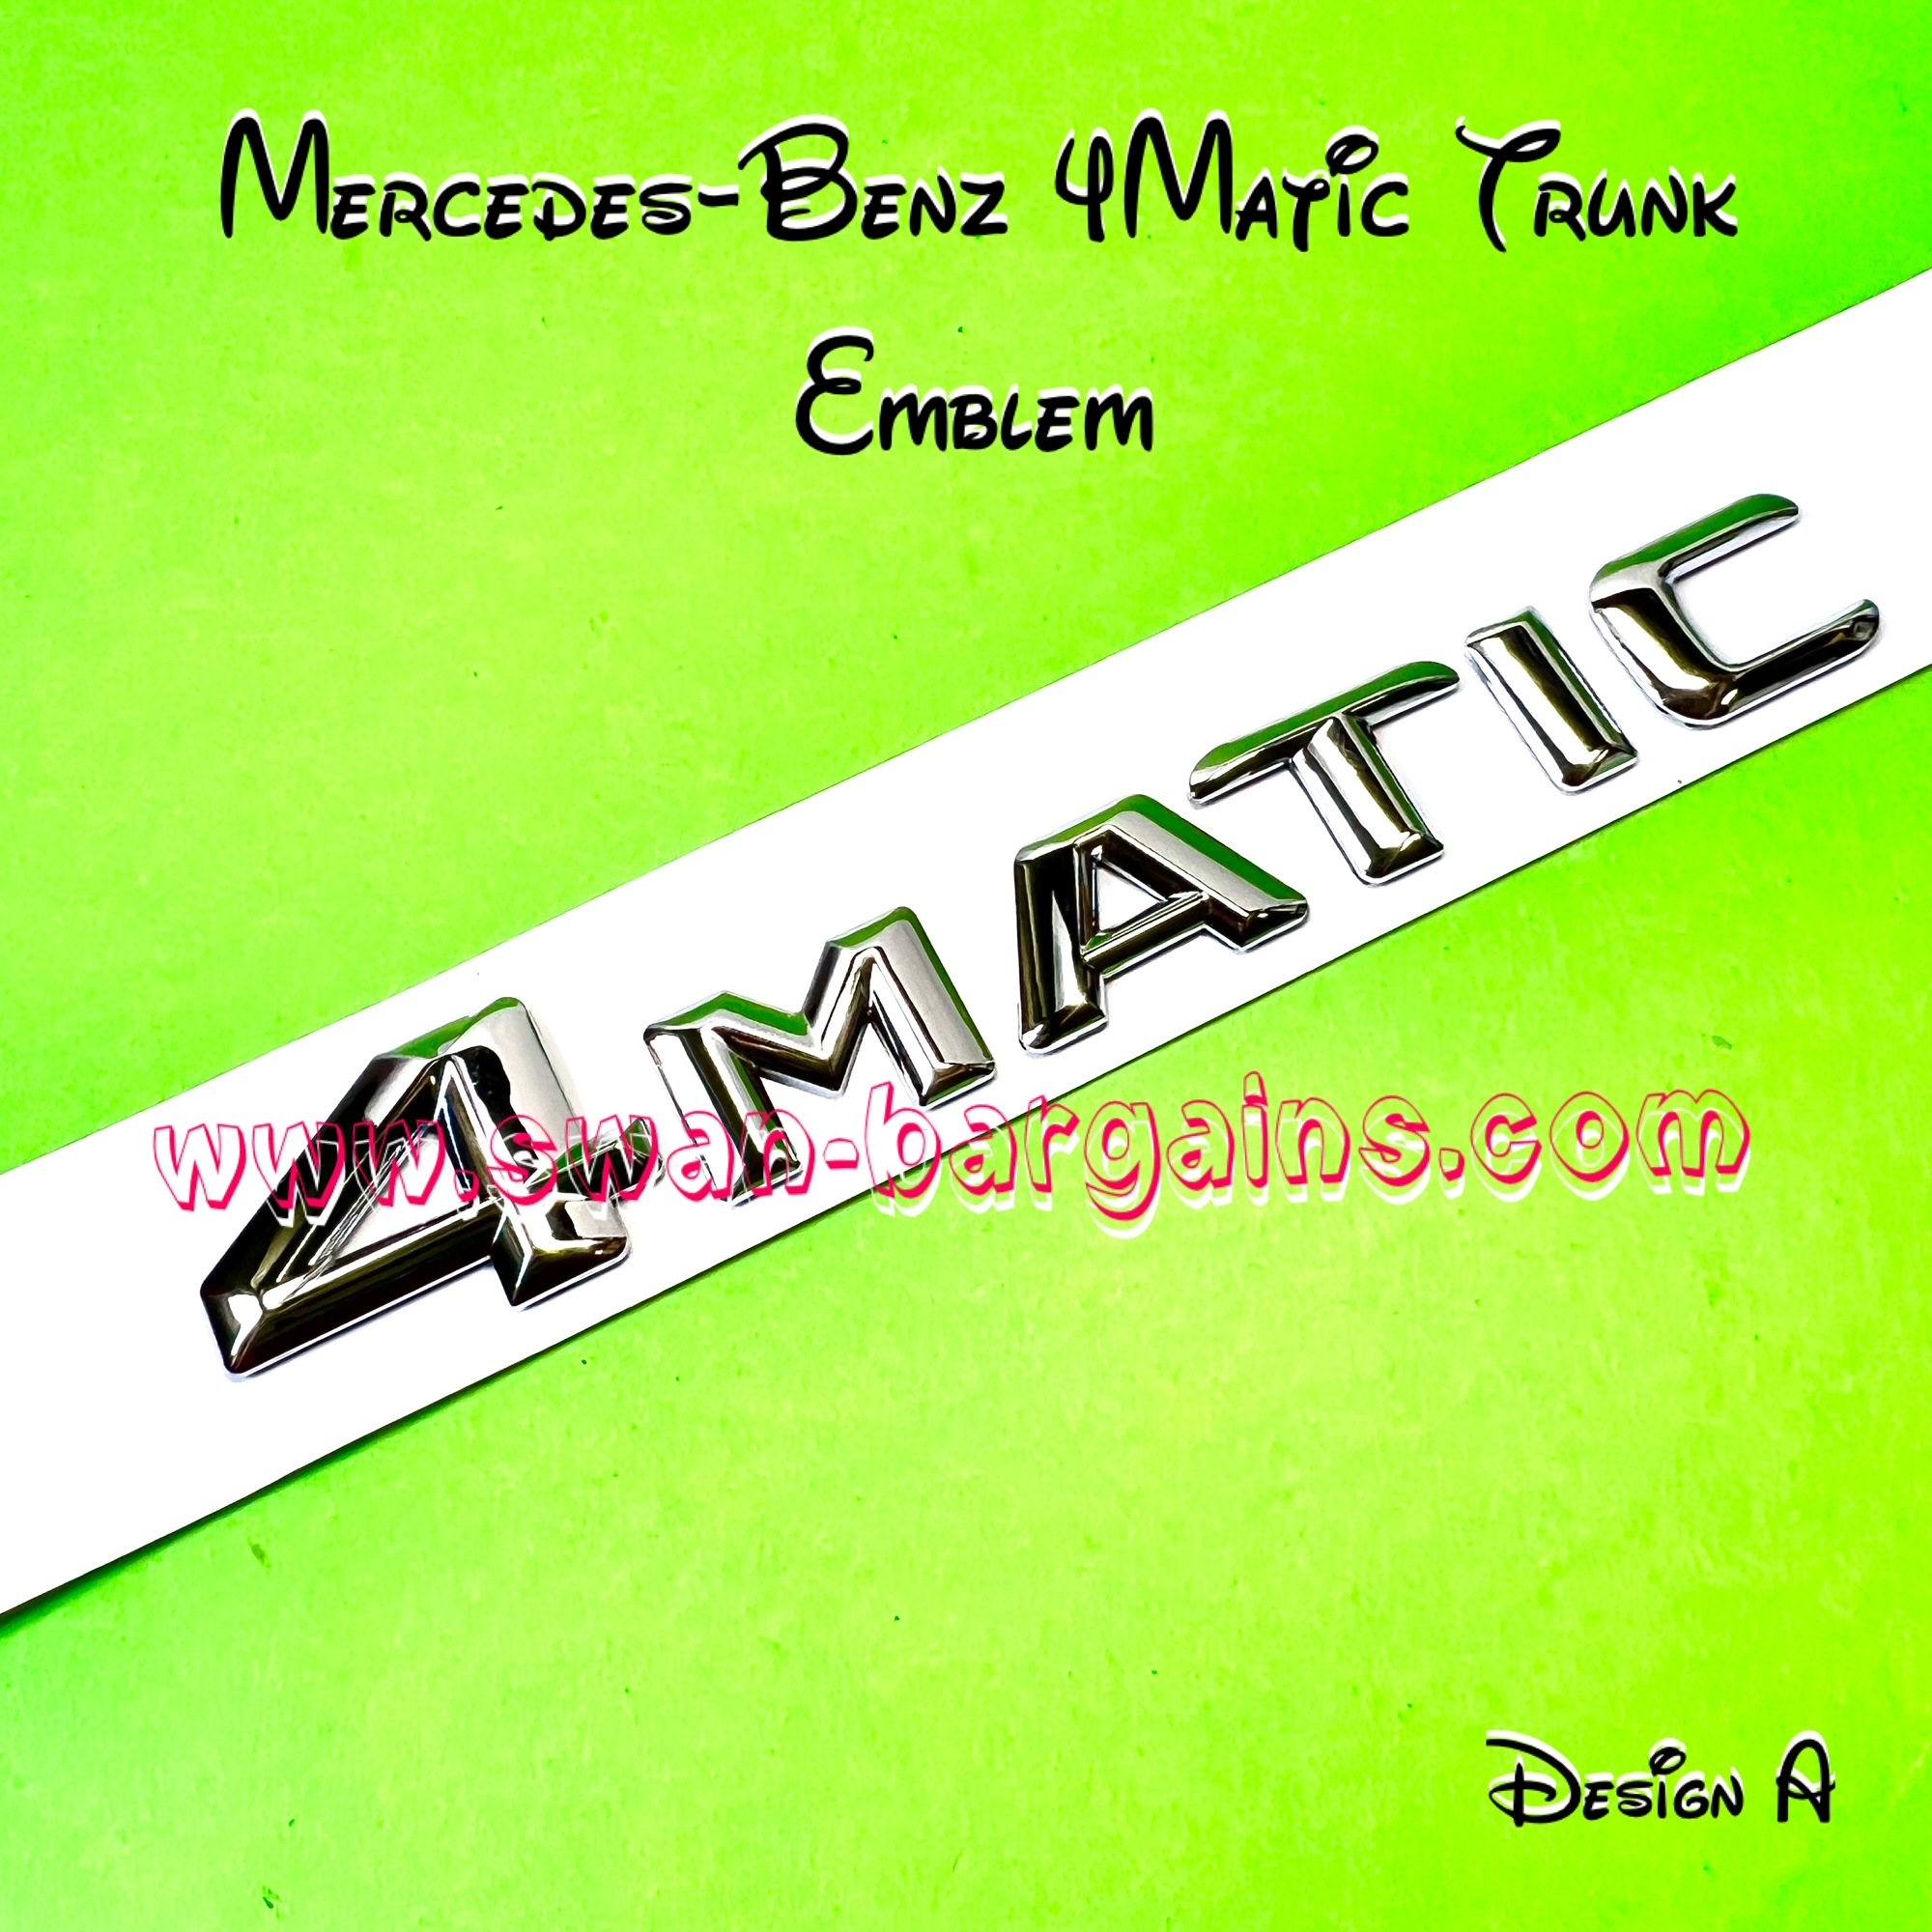 Mercedes Benz 4matic Trunk Lettering Emblem Sticker – Welcome to Swan  Bargains Online Store!